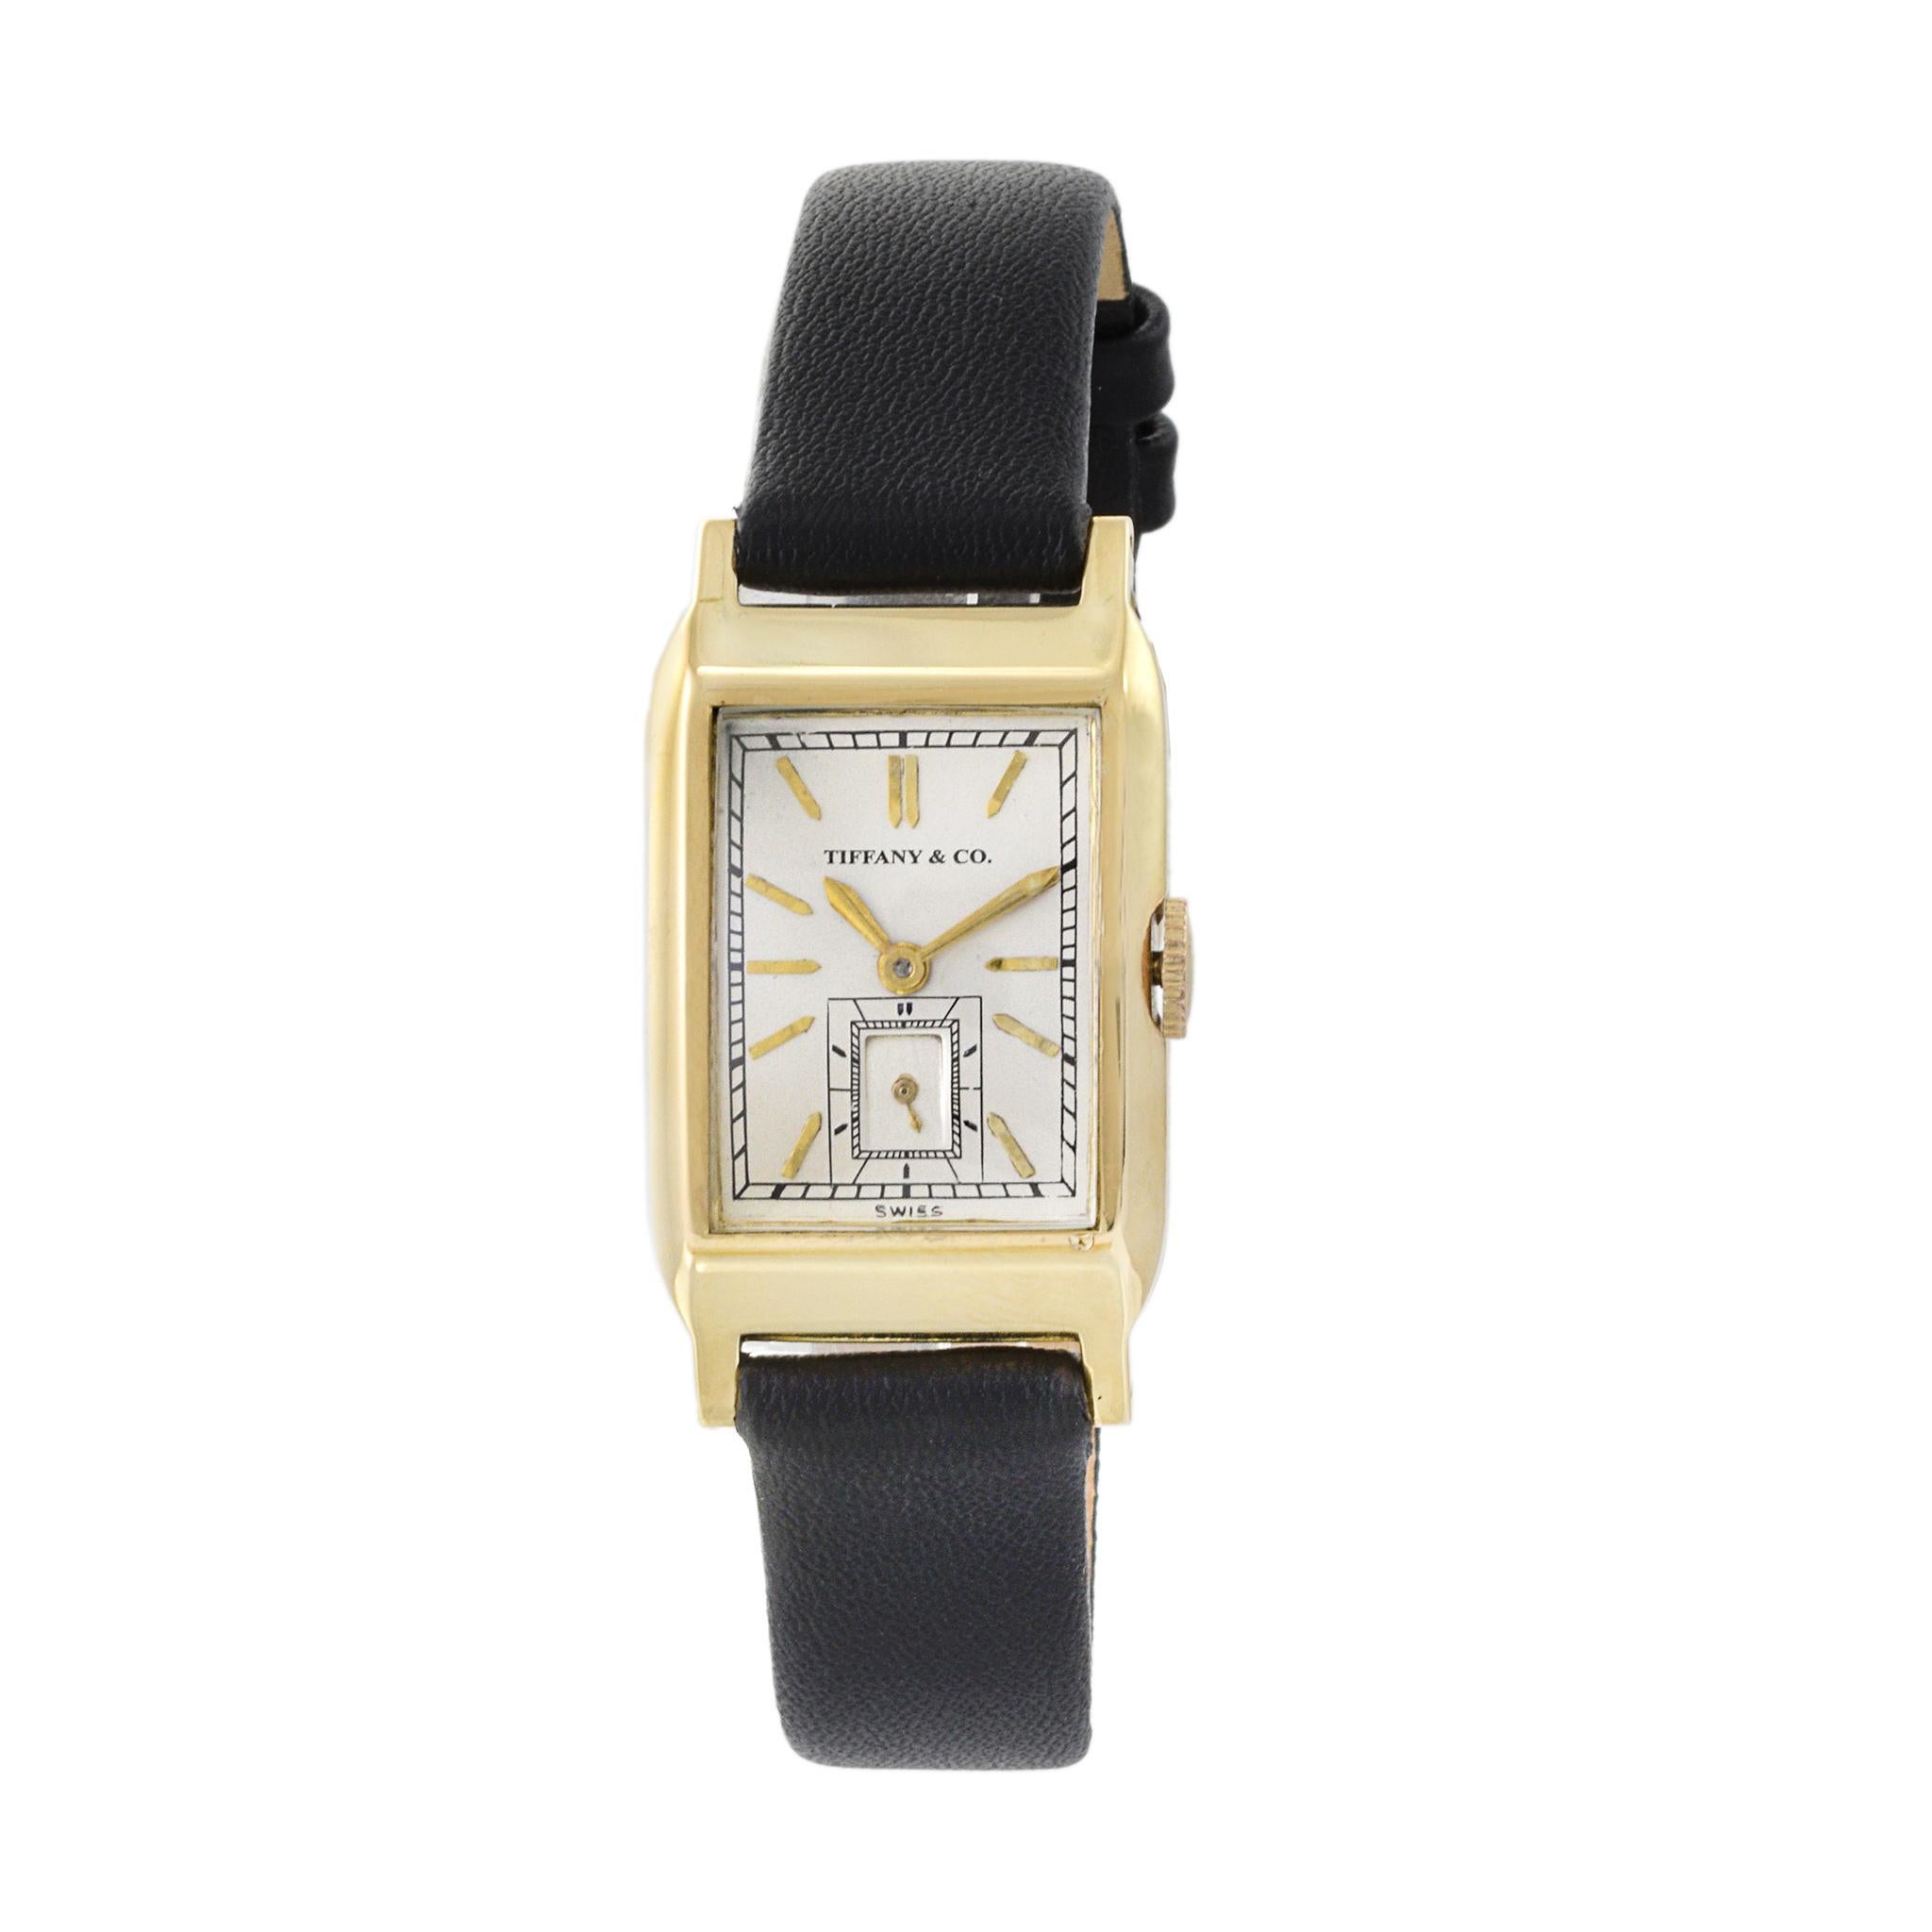 This is an elegant 1930's Tiffany & Co. Tank 14K Gold Tank watch. This watch was produced by Movado at the height of its movement making history. The case measures 21mm x 37mm (lug to lug). 

This watch is powered by a 17 jewel manual wind Movado